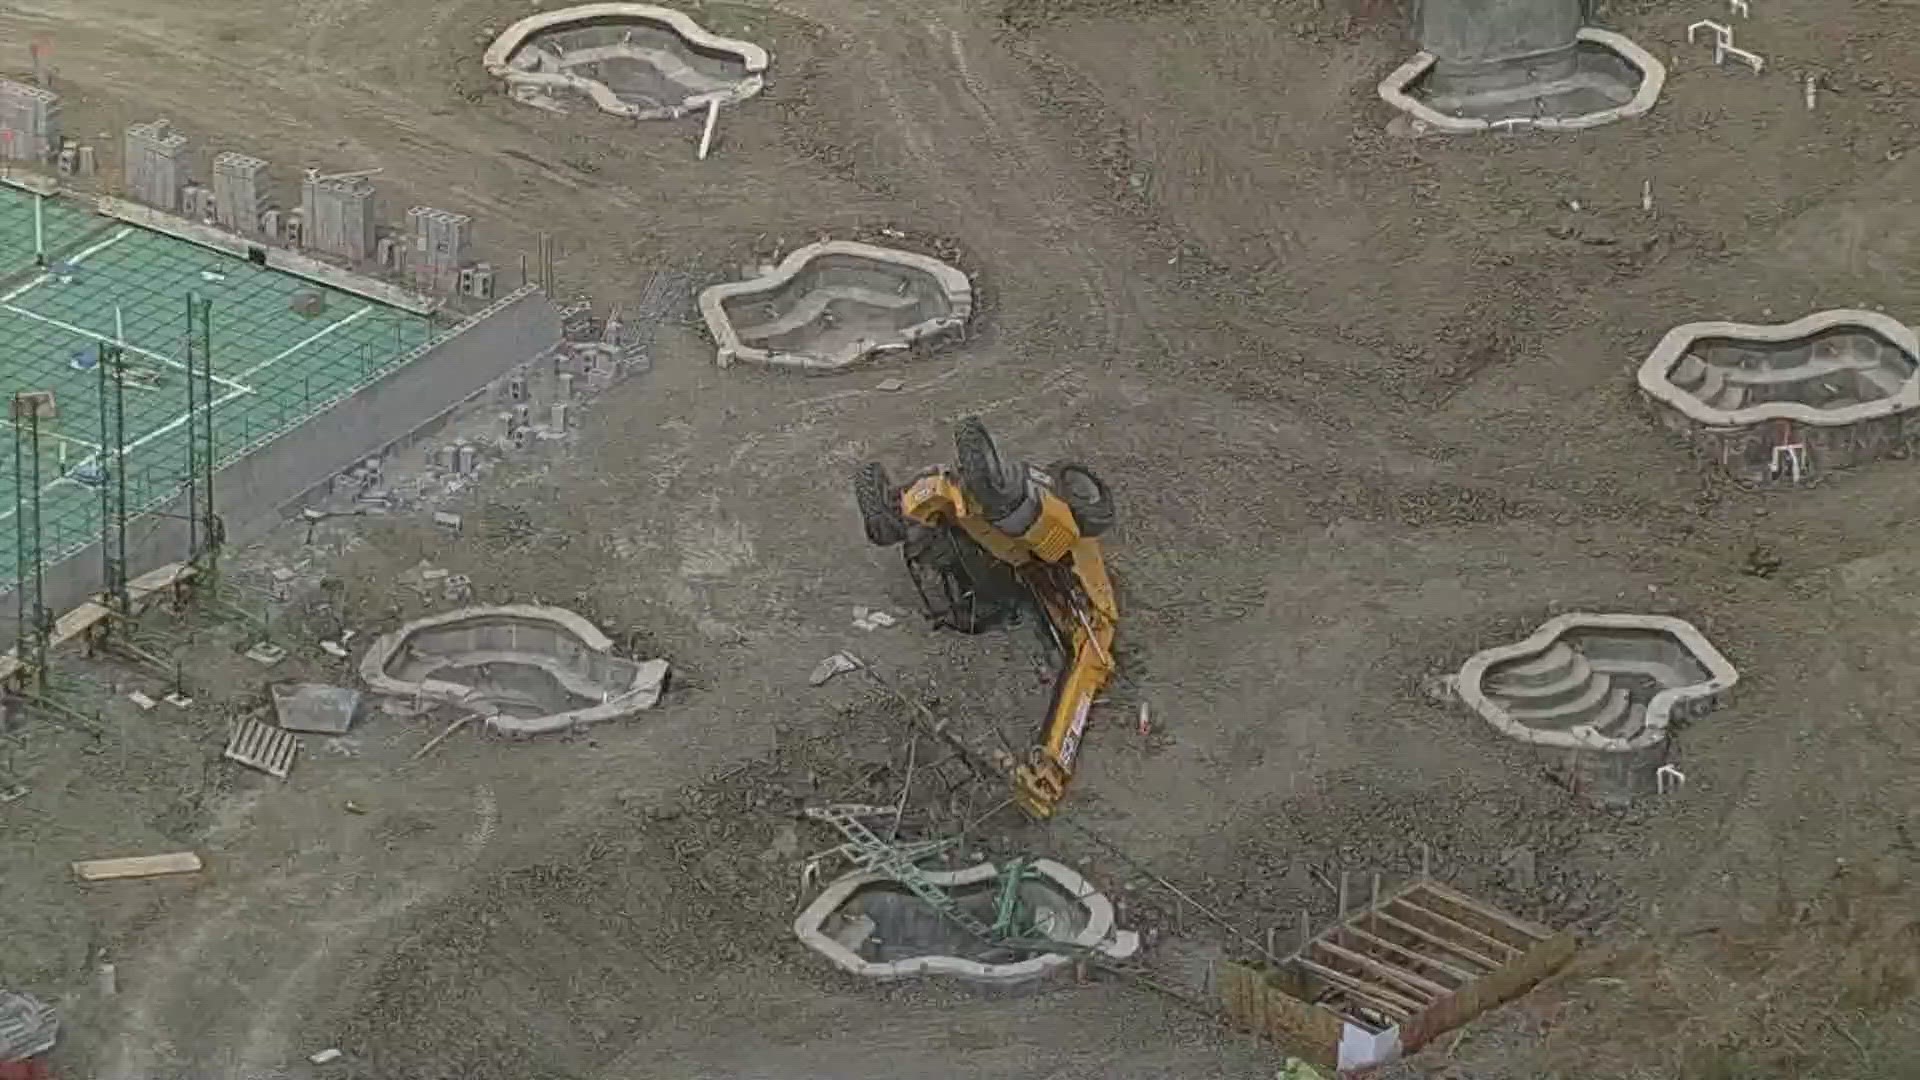 The accident happened at the construction site of a hot springs resort coming to Grandscape.